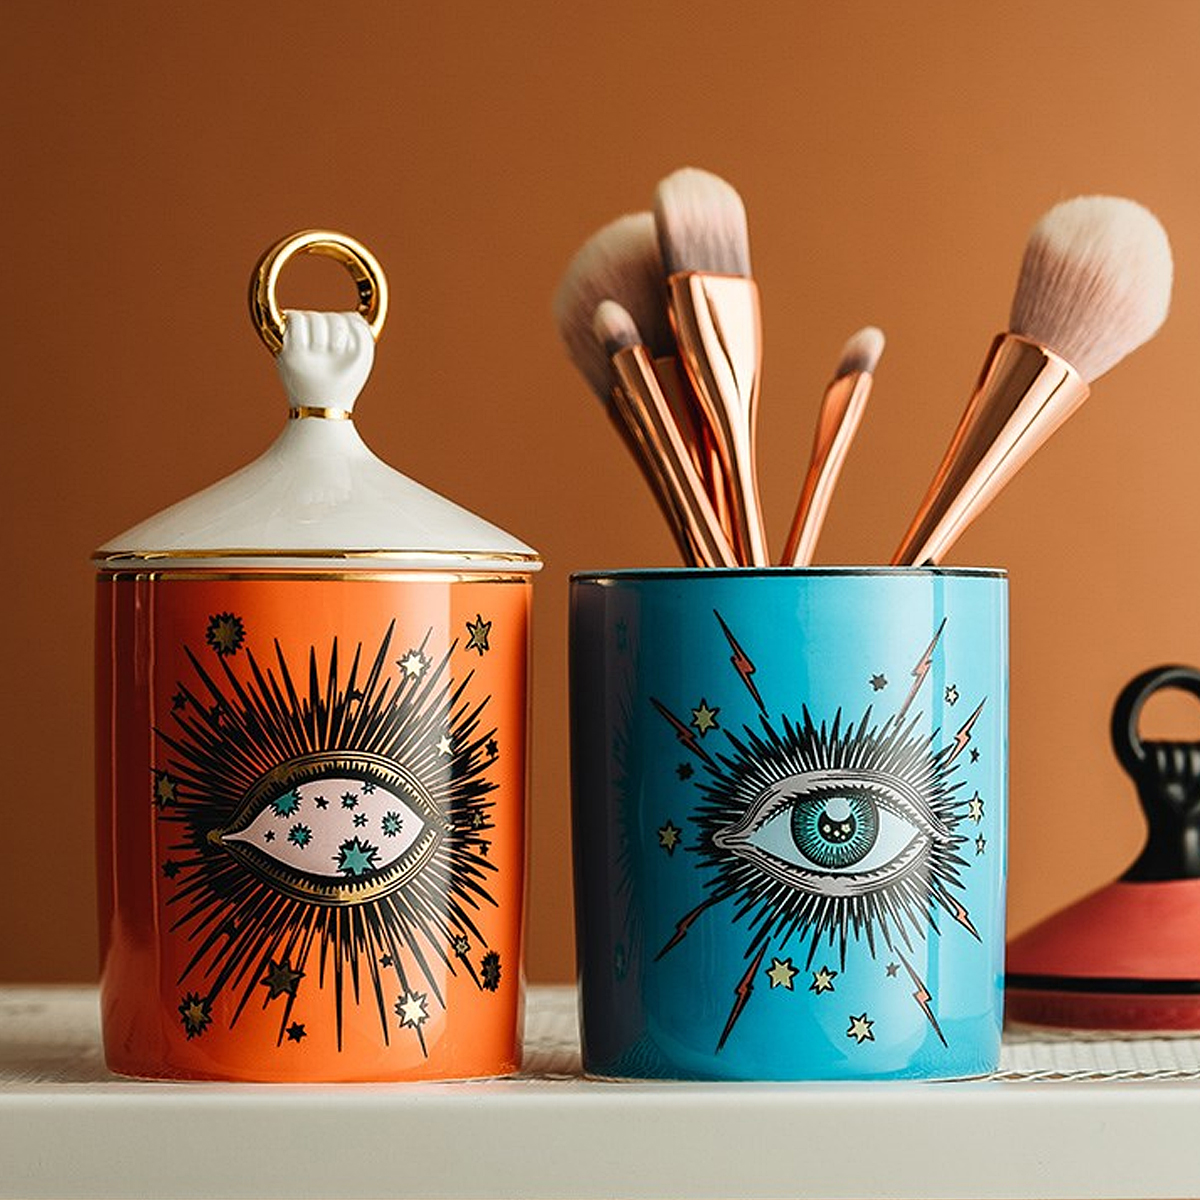 Big-Eyes-Jar-Hands-with-Ceramic-Lids-Decorative-Cans-Candle-Holders-Storage-Cans-Cosmetic-Storage-Ta-1649421-4